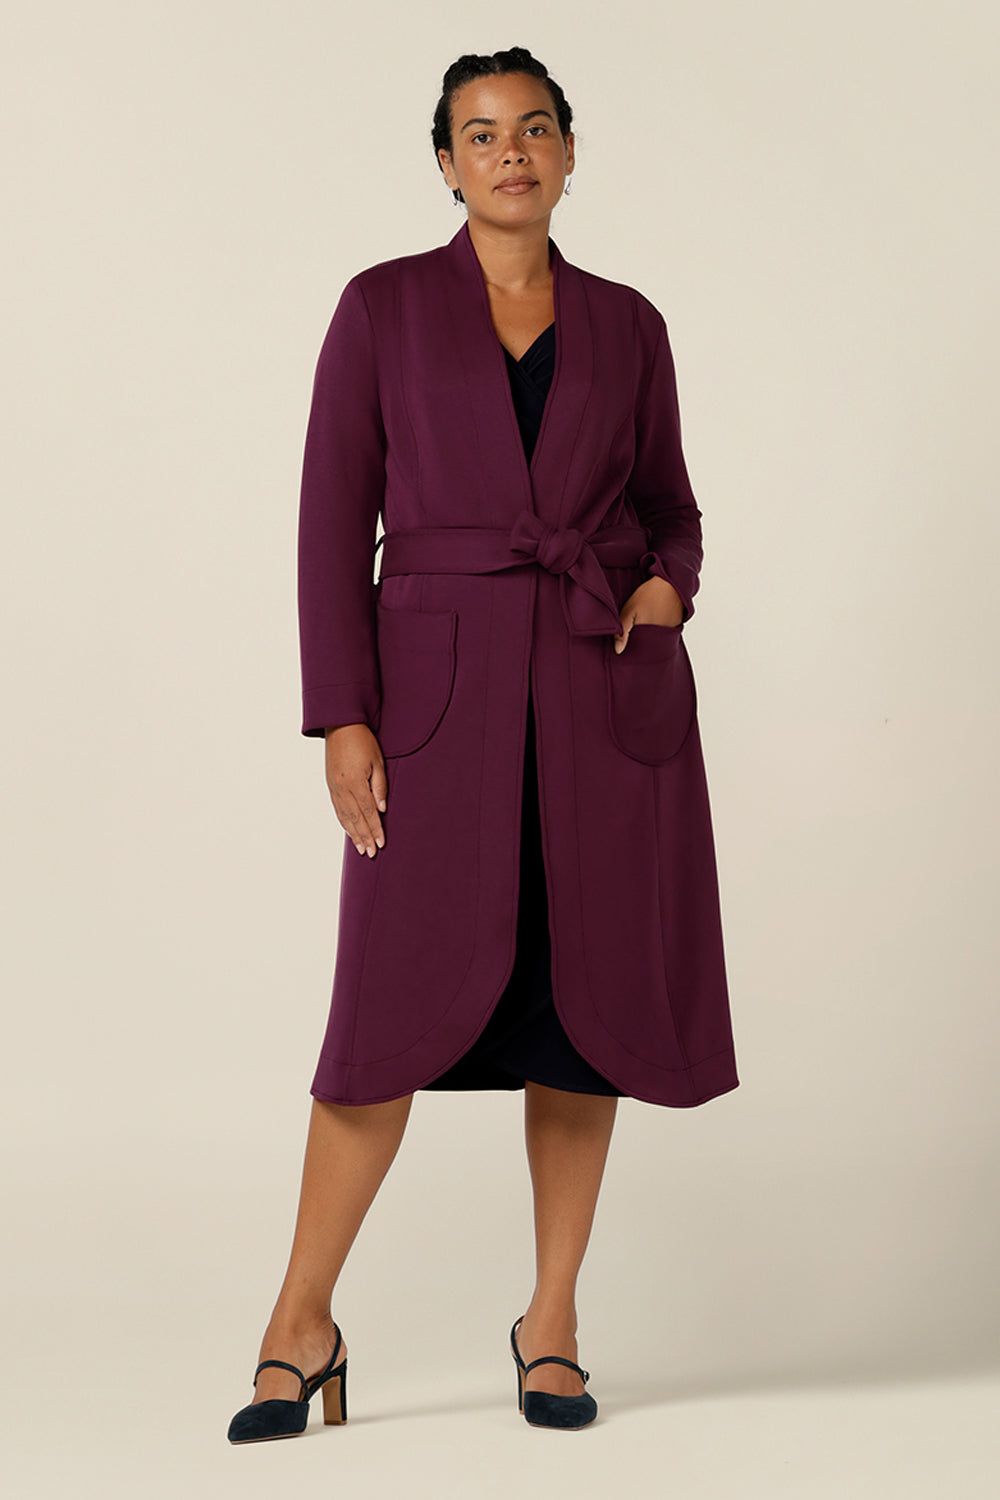 Why we love soft tailoring for winter - this light-weight trenchcoat by Australian and New Zealand women's clothing brand, L&F has a soft stretch fit that makes it a comfortable coat for layering over work and corporate wear, and travelling that work commute